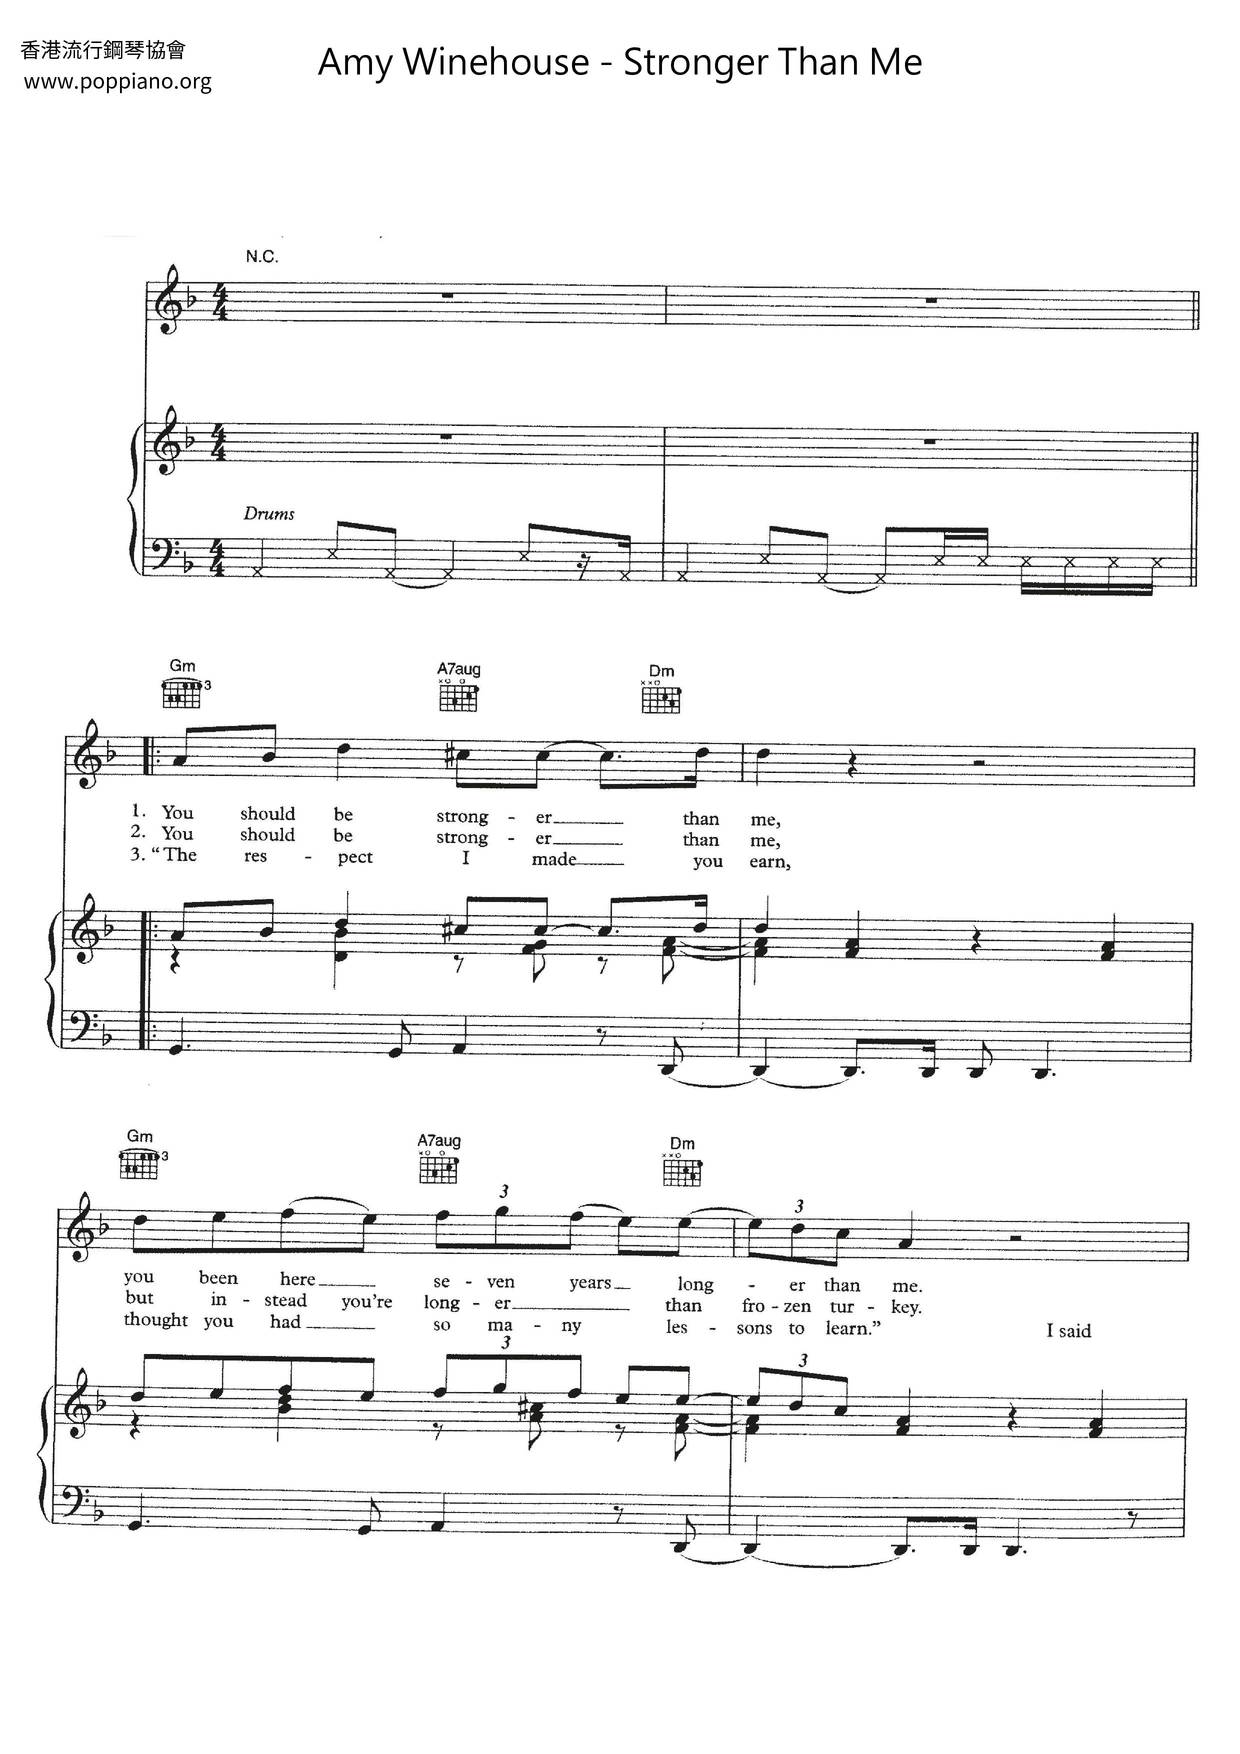 Amy winehouse you should be stronger than me lyrics Amy Winehouse Stronger Than Me Sheet Music Pdf Free Score Download